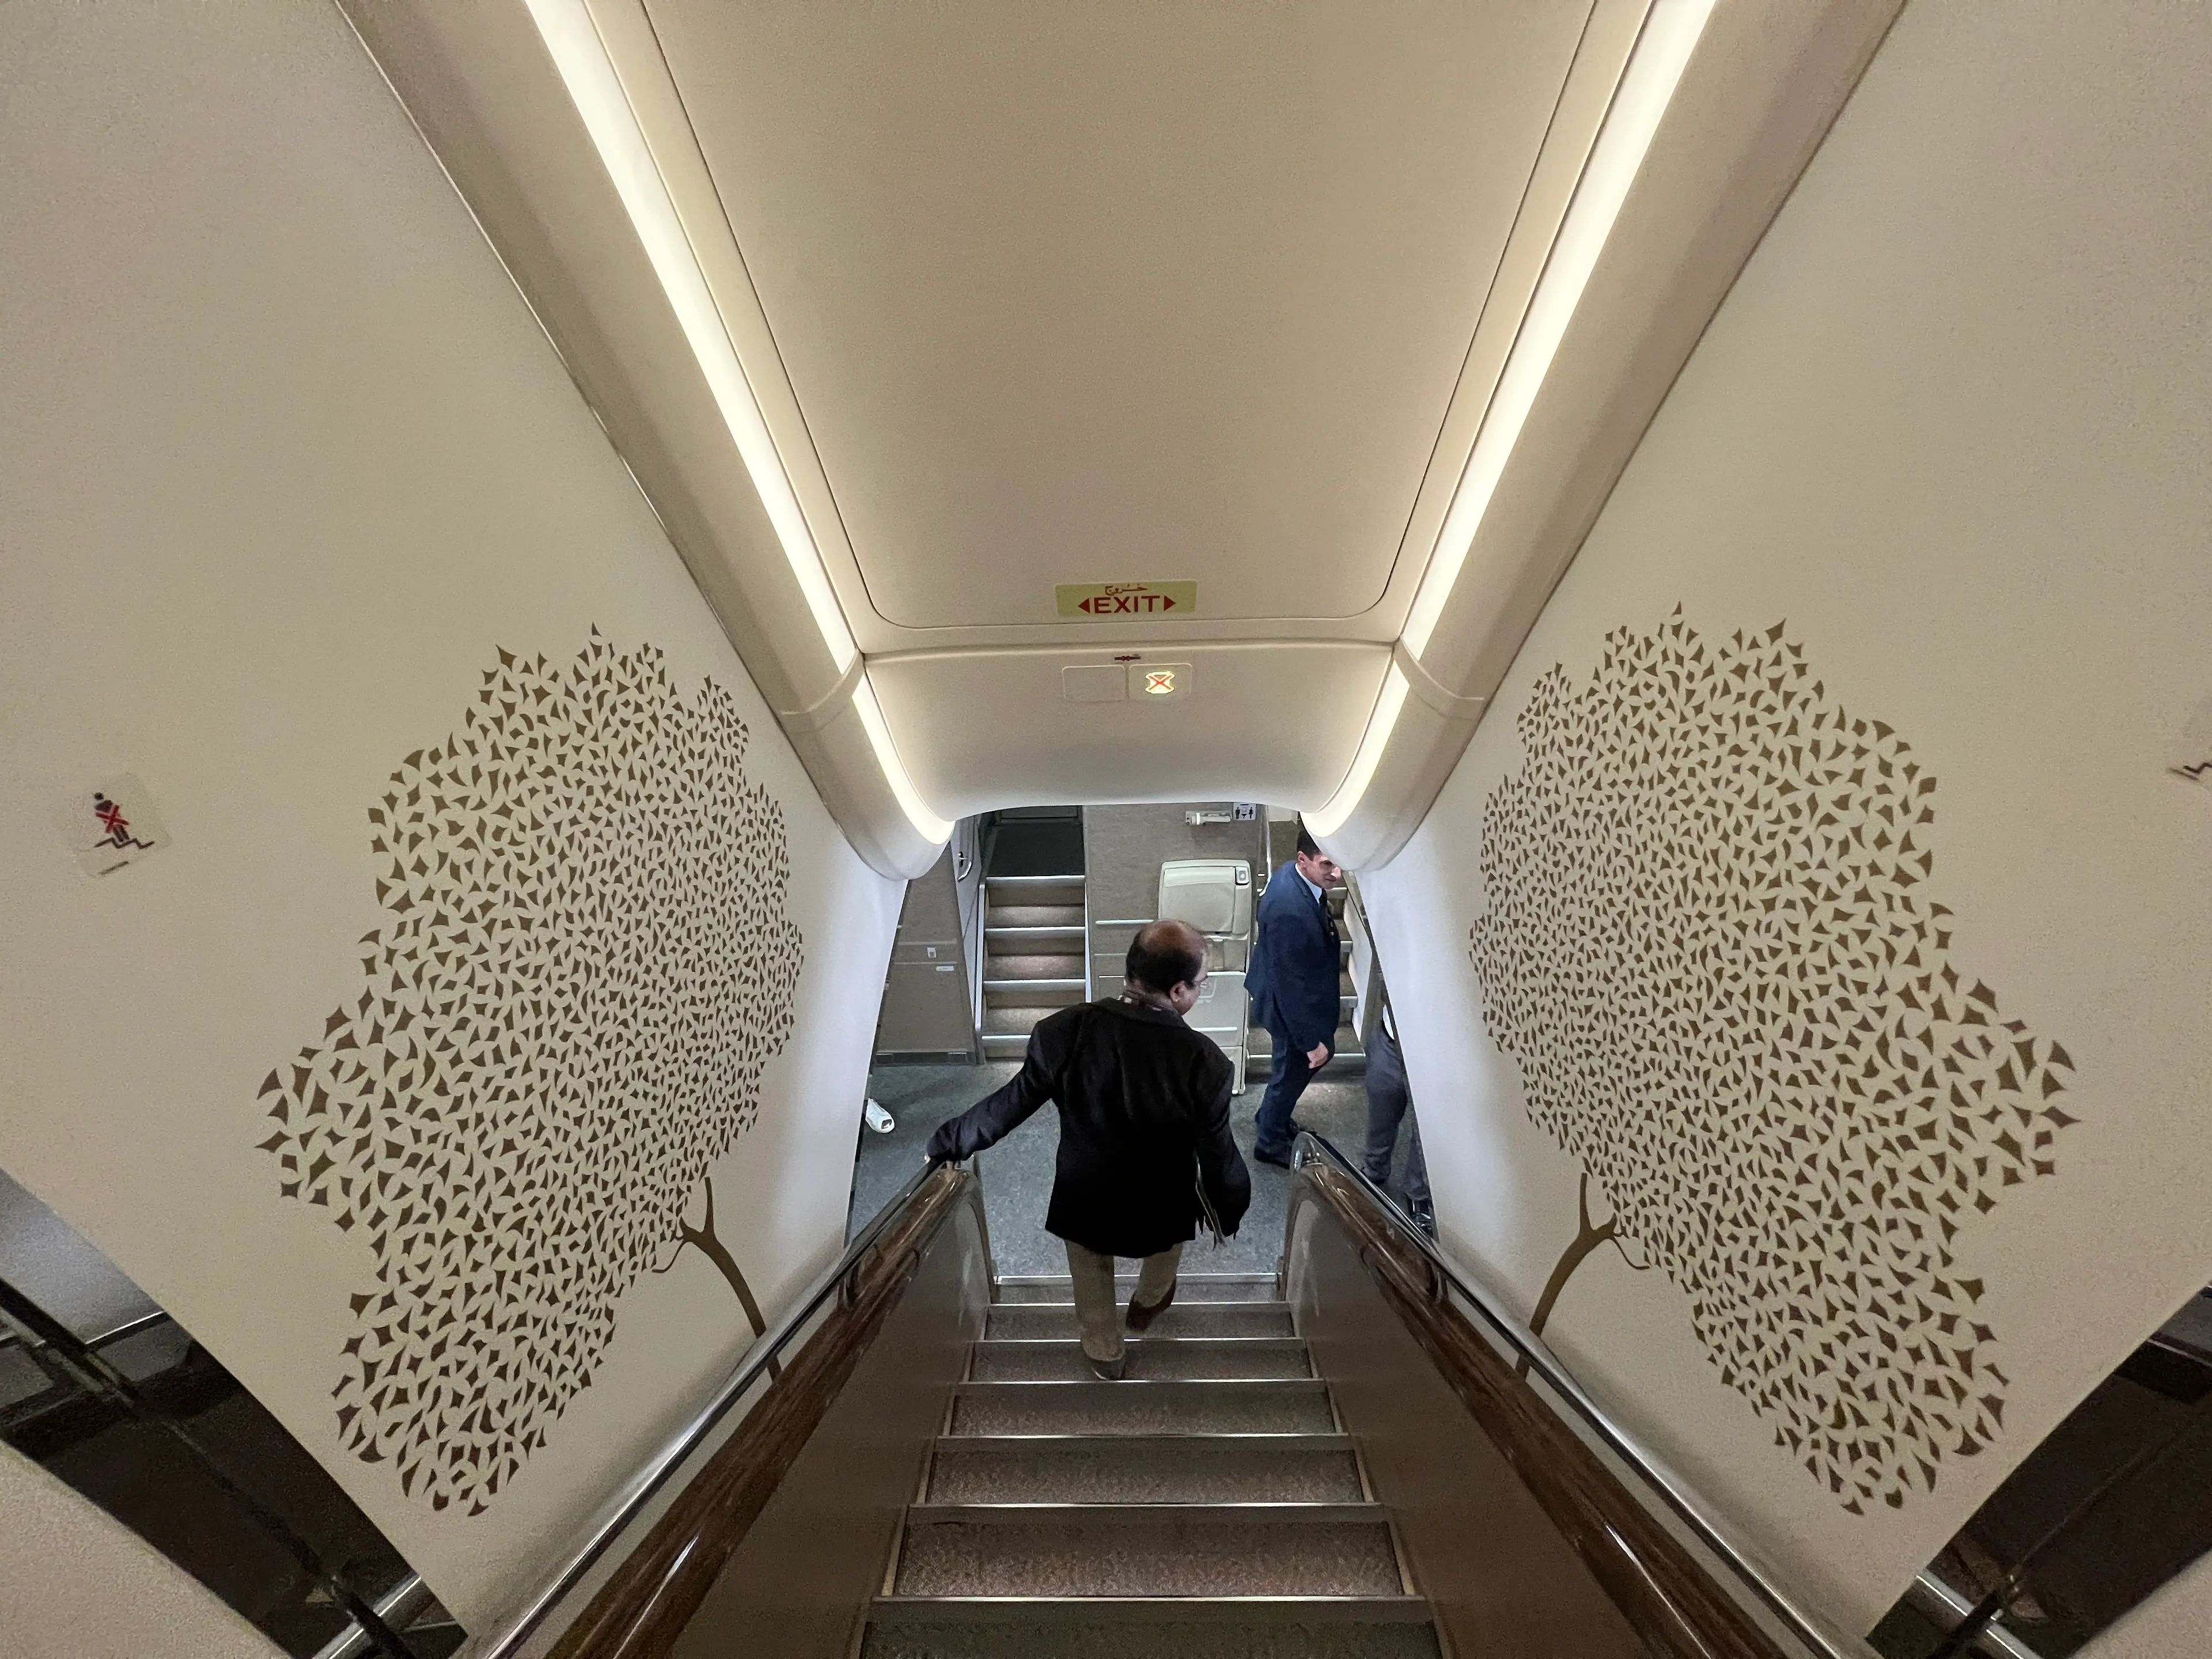 Looking down the front staircase onboard an Emirates A380, with ornate gold tree designs on the white wallpaper